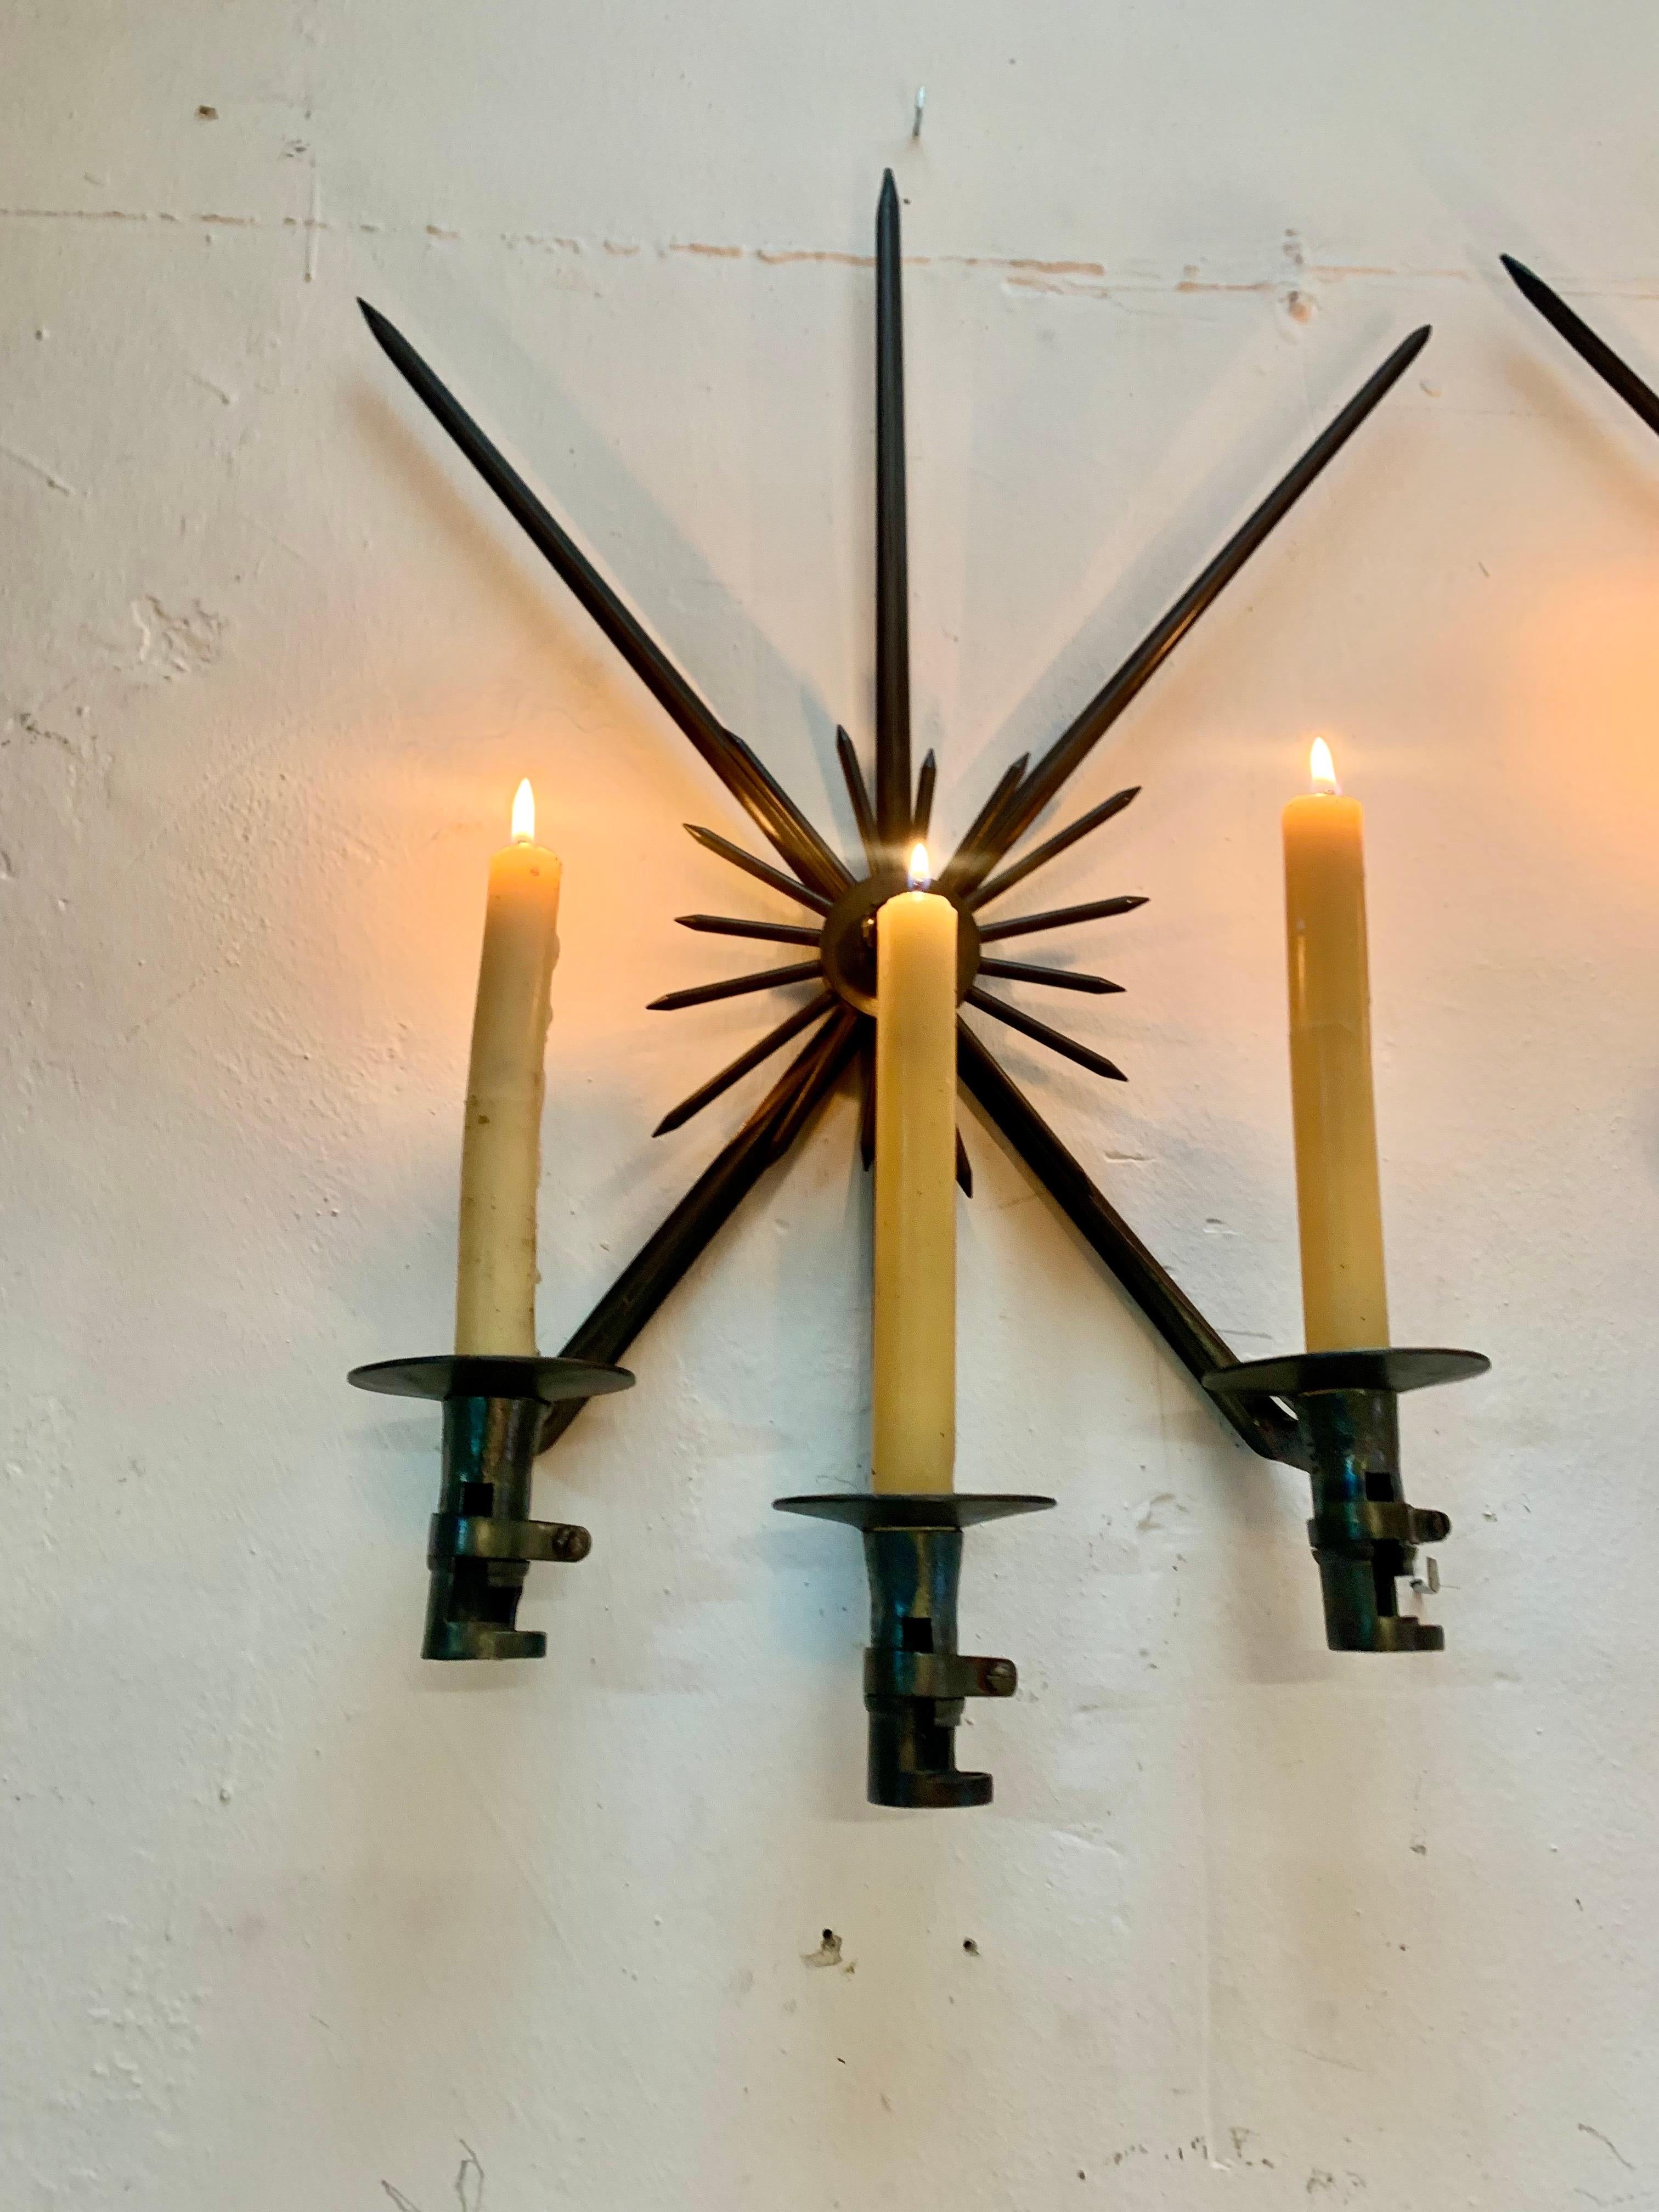 Pair of Apppliques Candle Sconces Made of Antique Bayonets For Sale 7